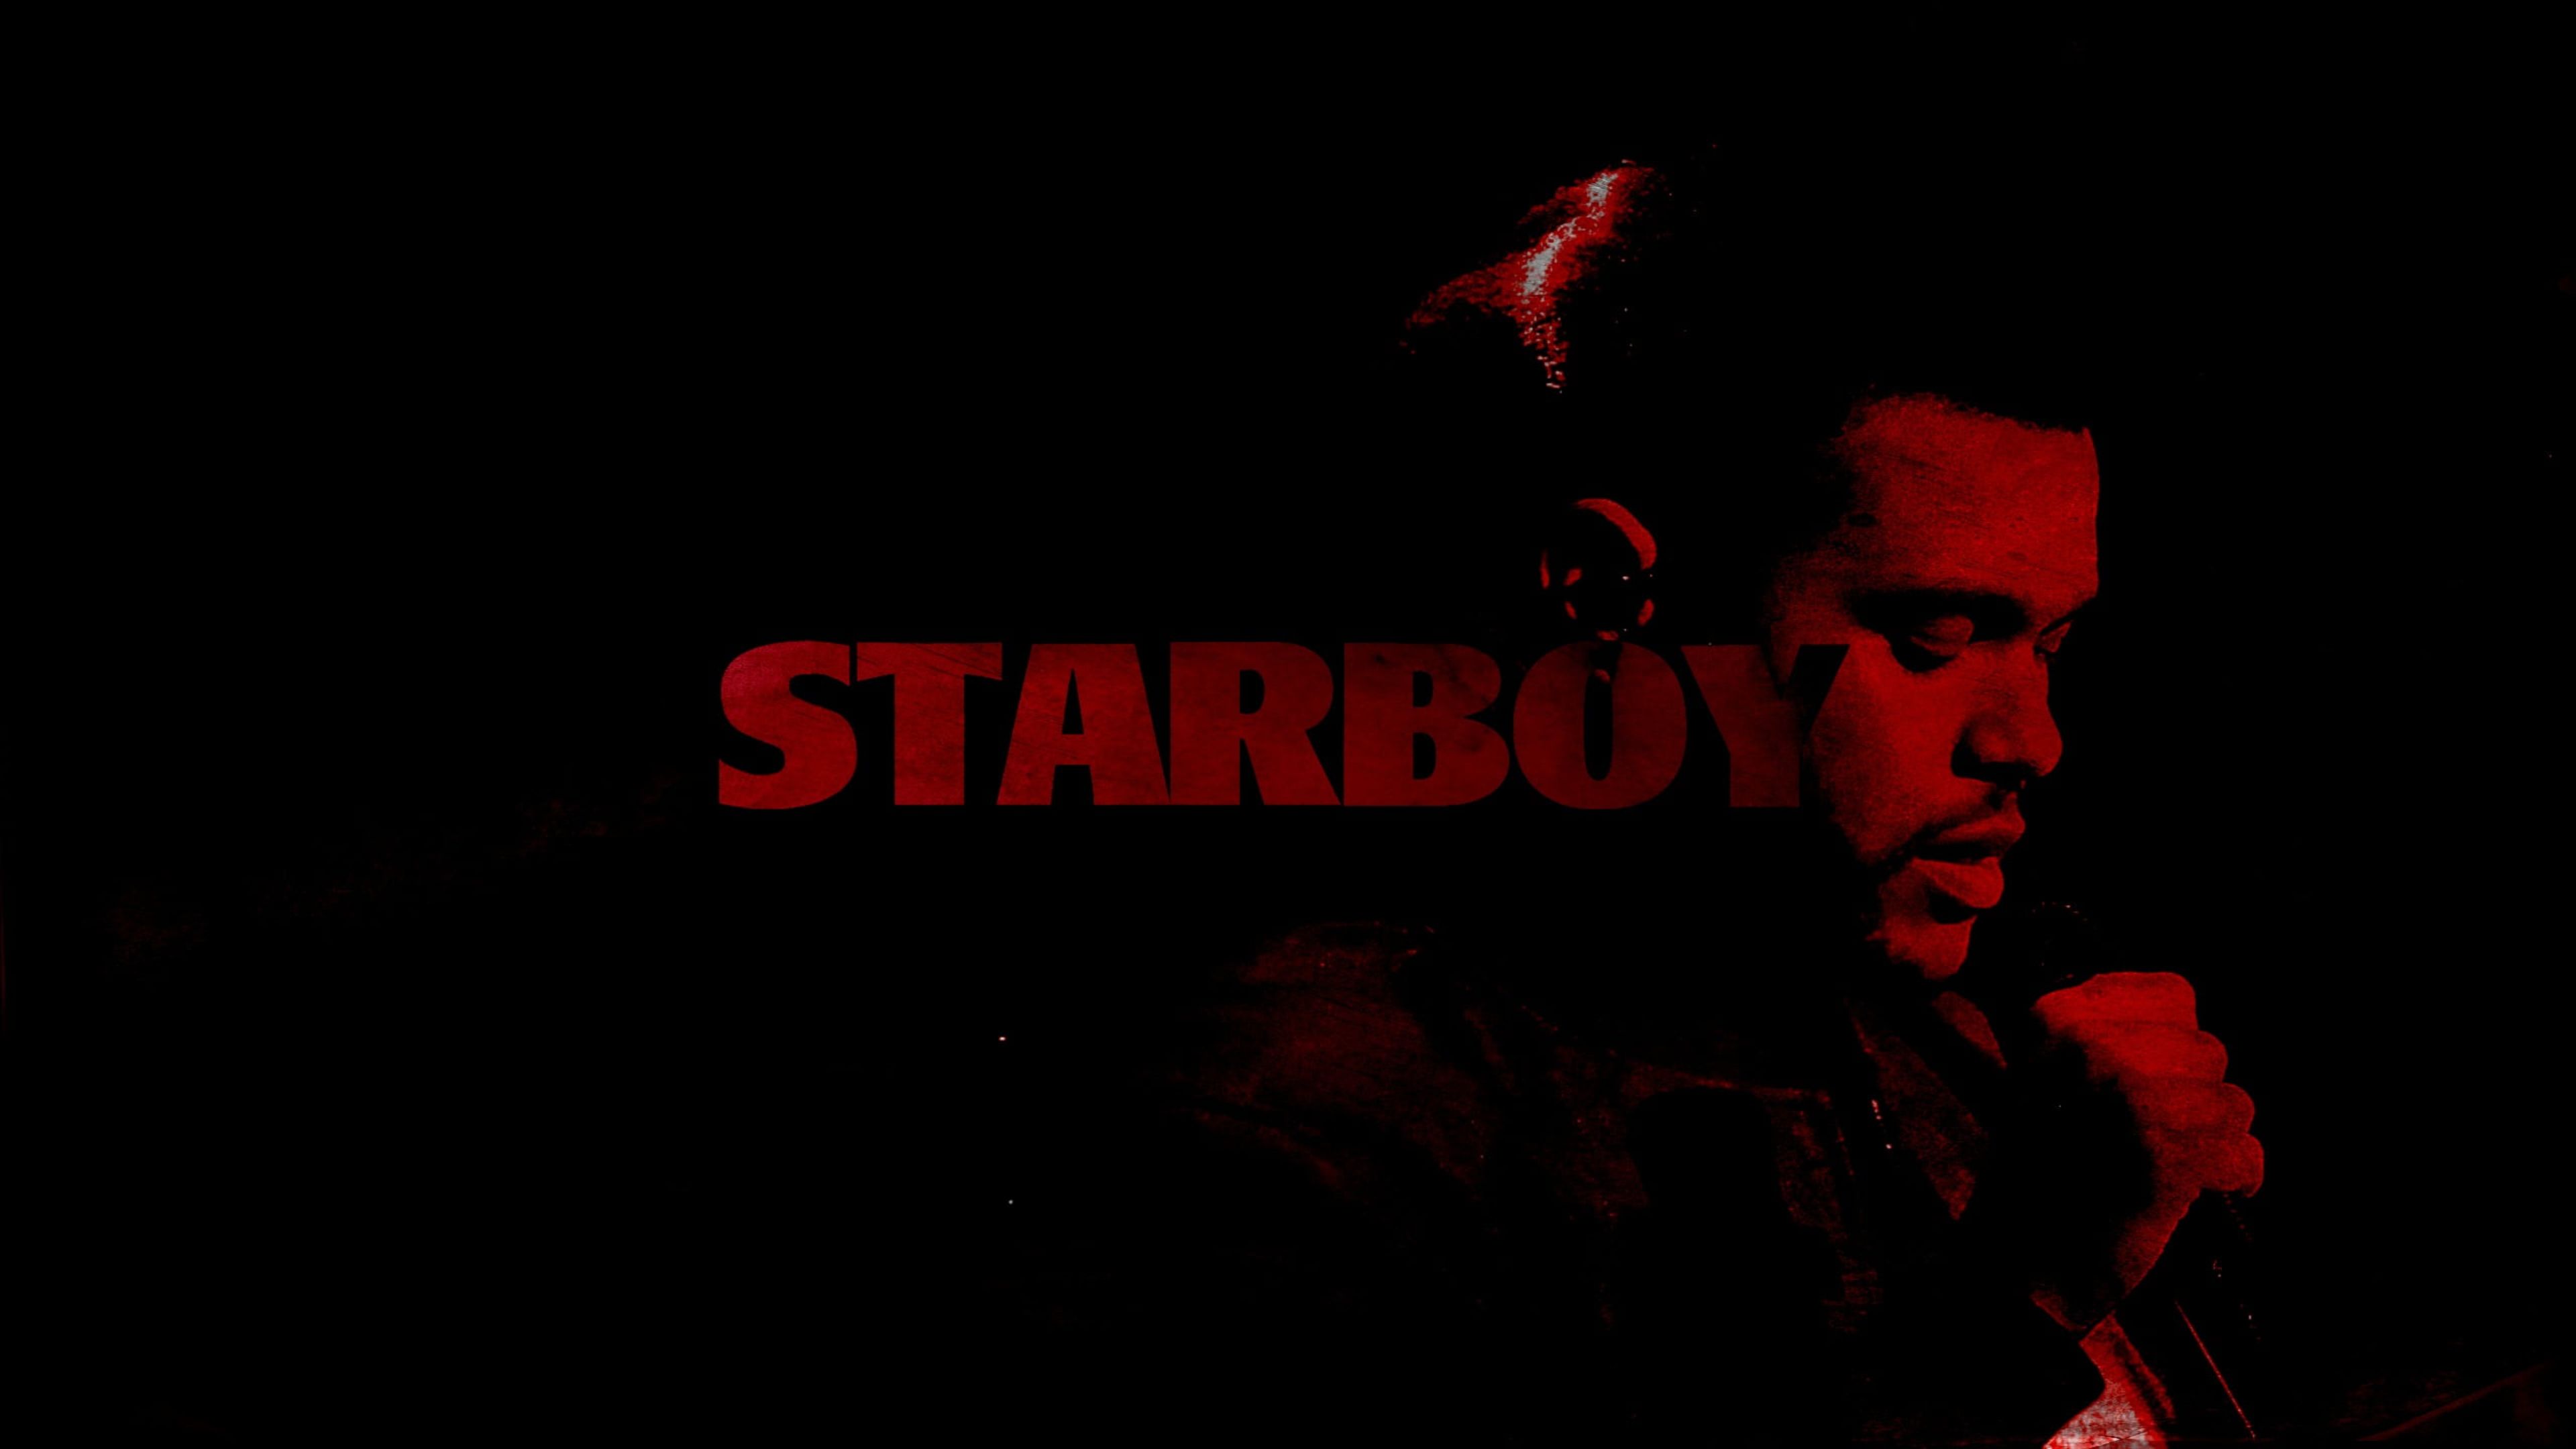 The Weeknd wallpaper 1920x1200 download - The Weeknd